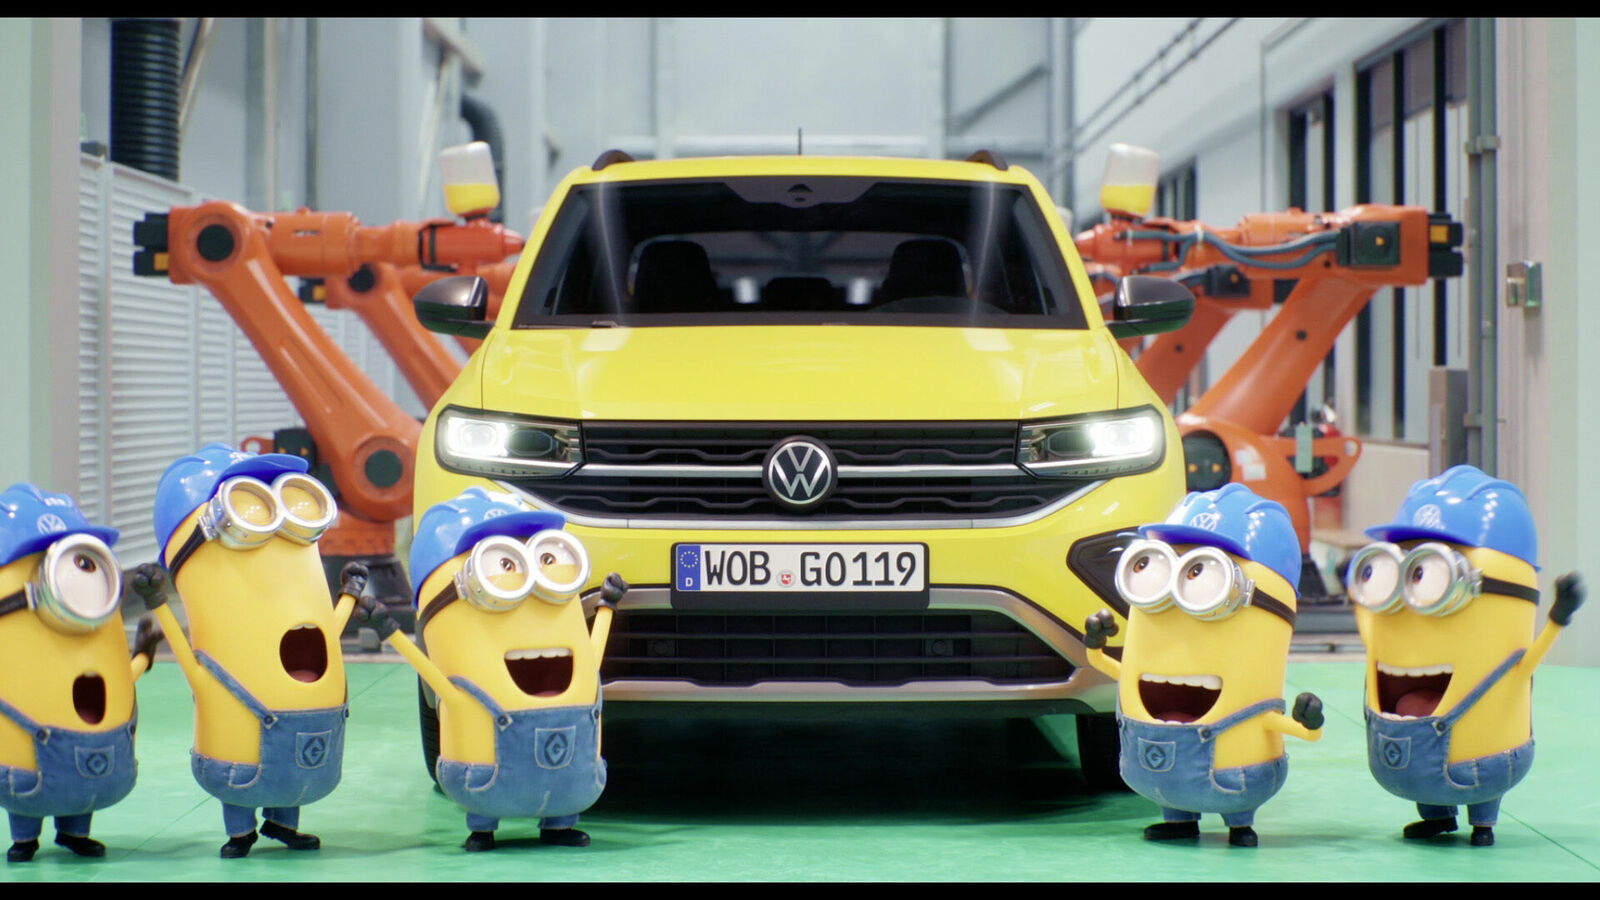 Volkswagen announces partnership with Illumination’s DESPICABLE ME 4